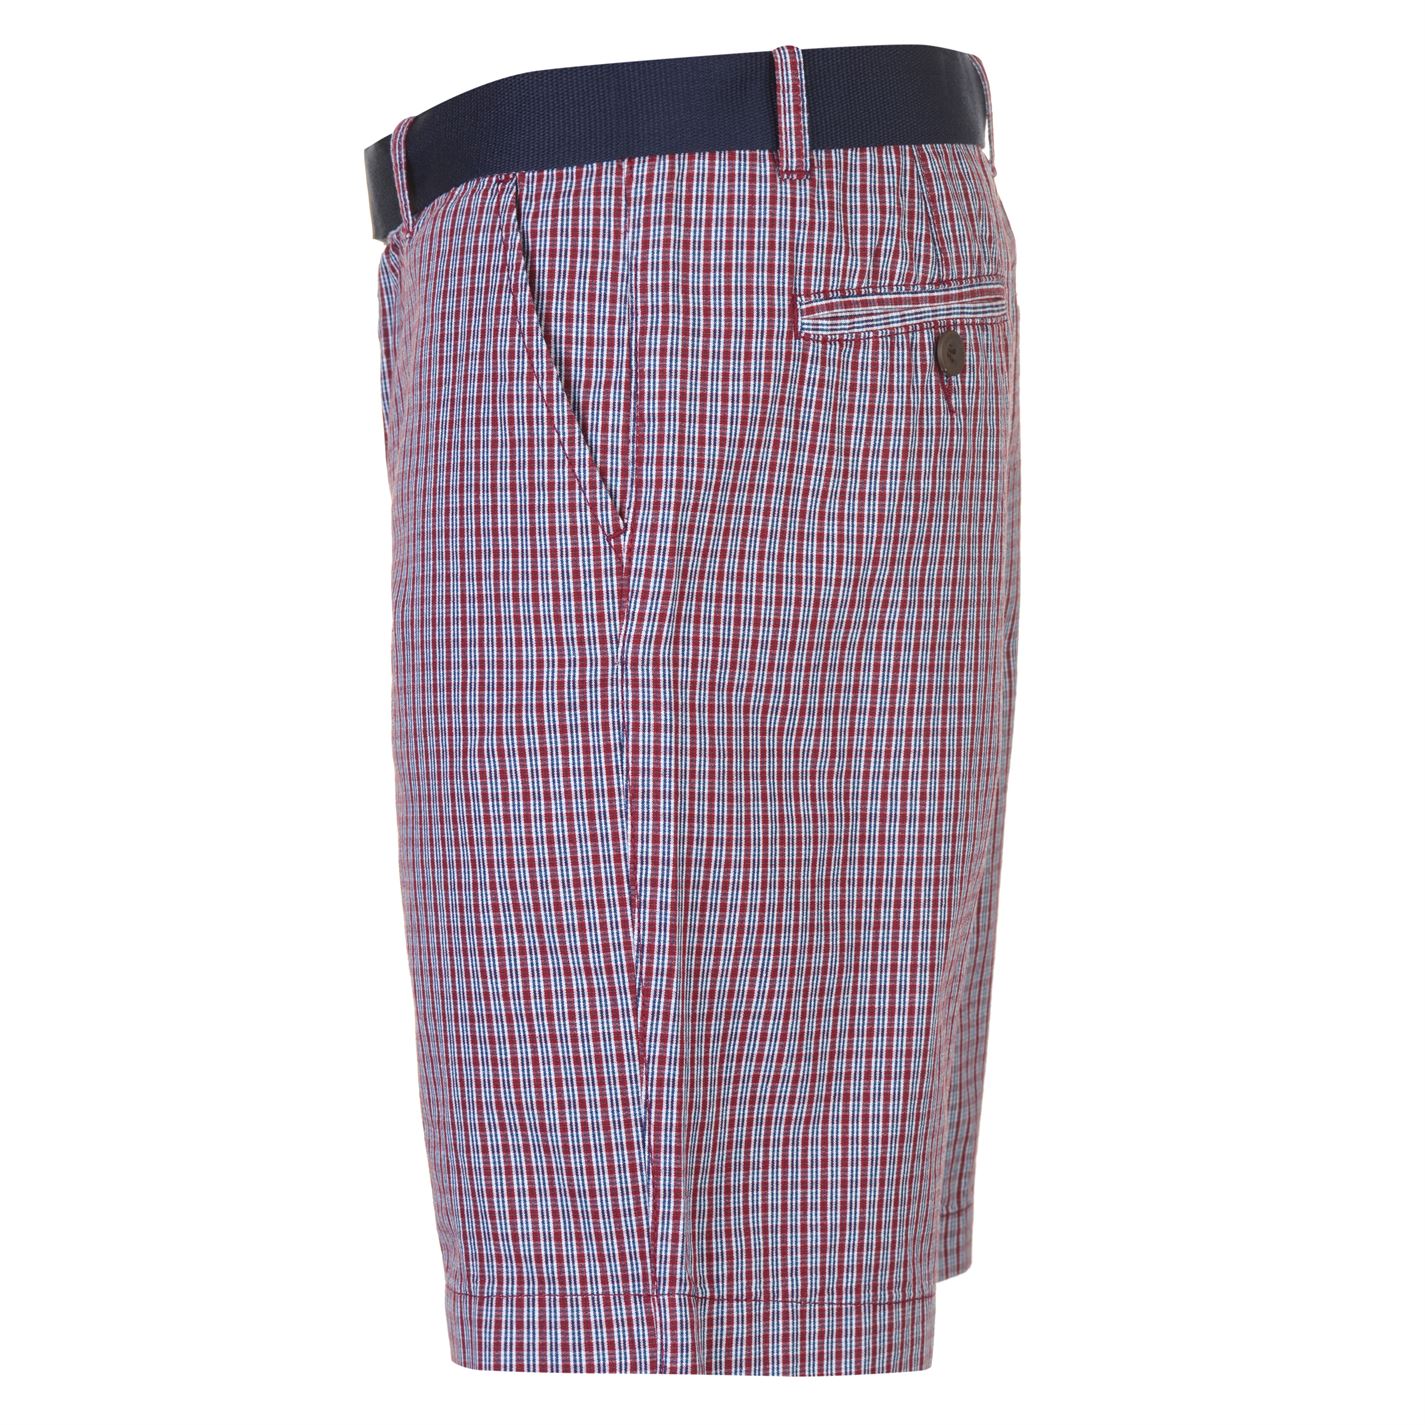 Pierre Cardin Homme Check Belted Short Pantalon Chino Pantalon Pantalon Chino